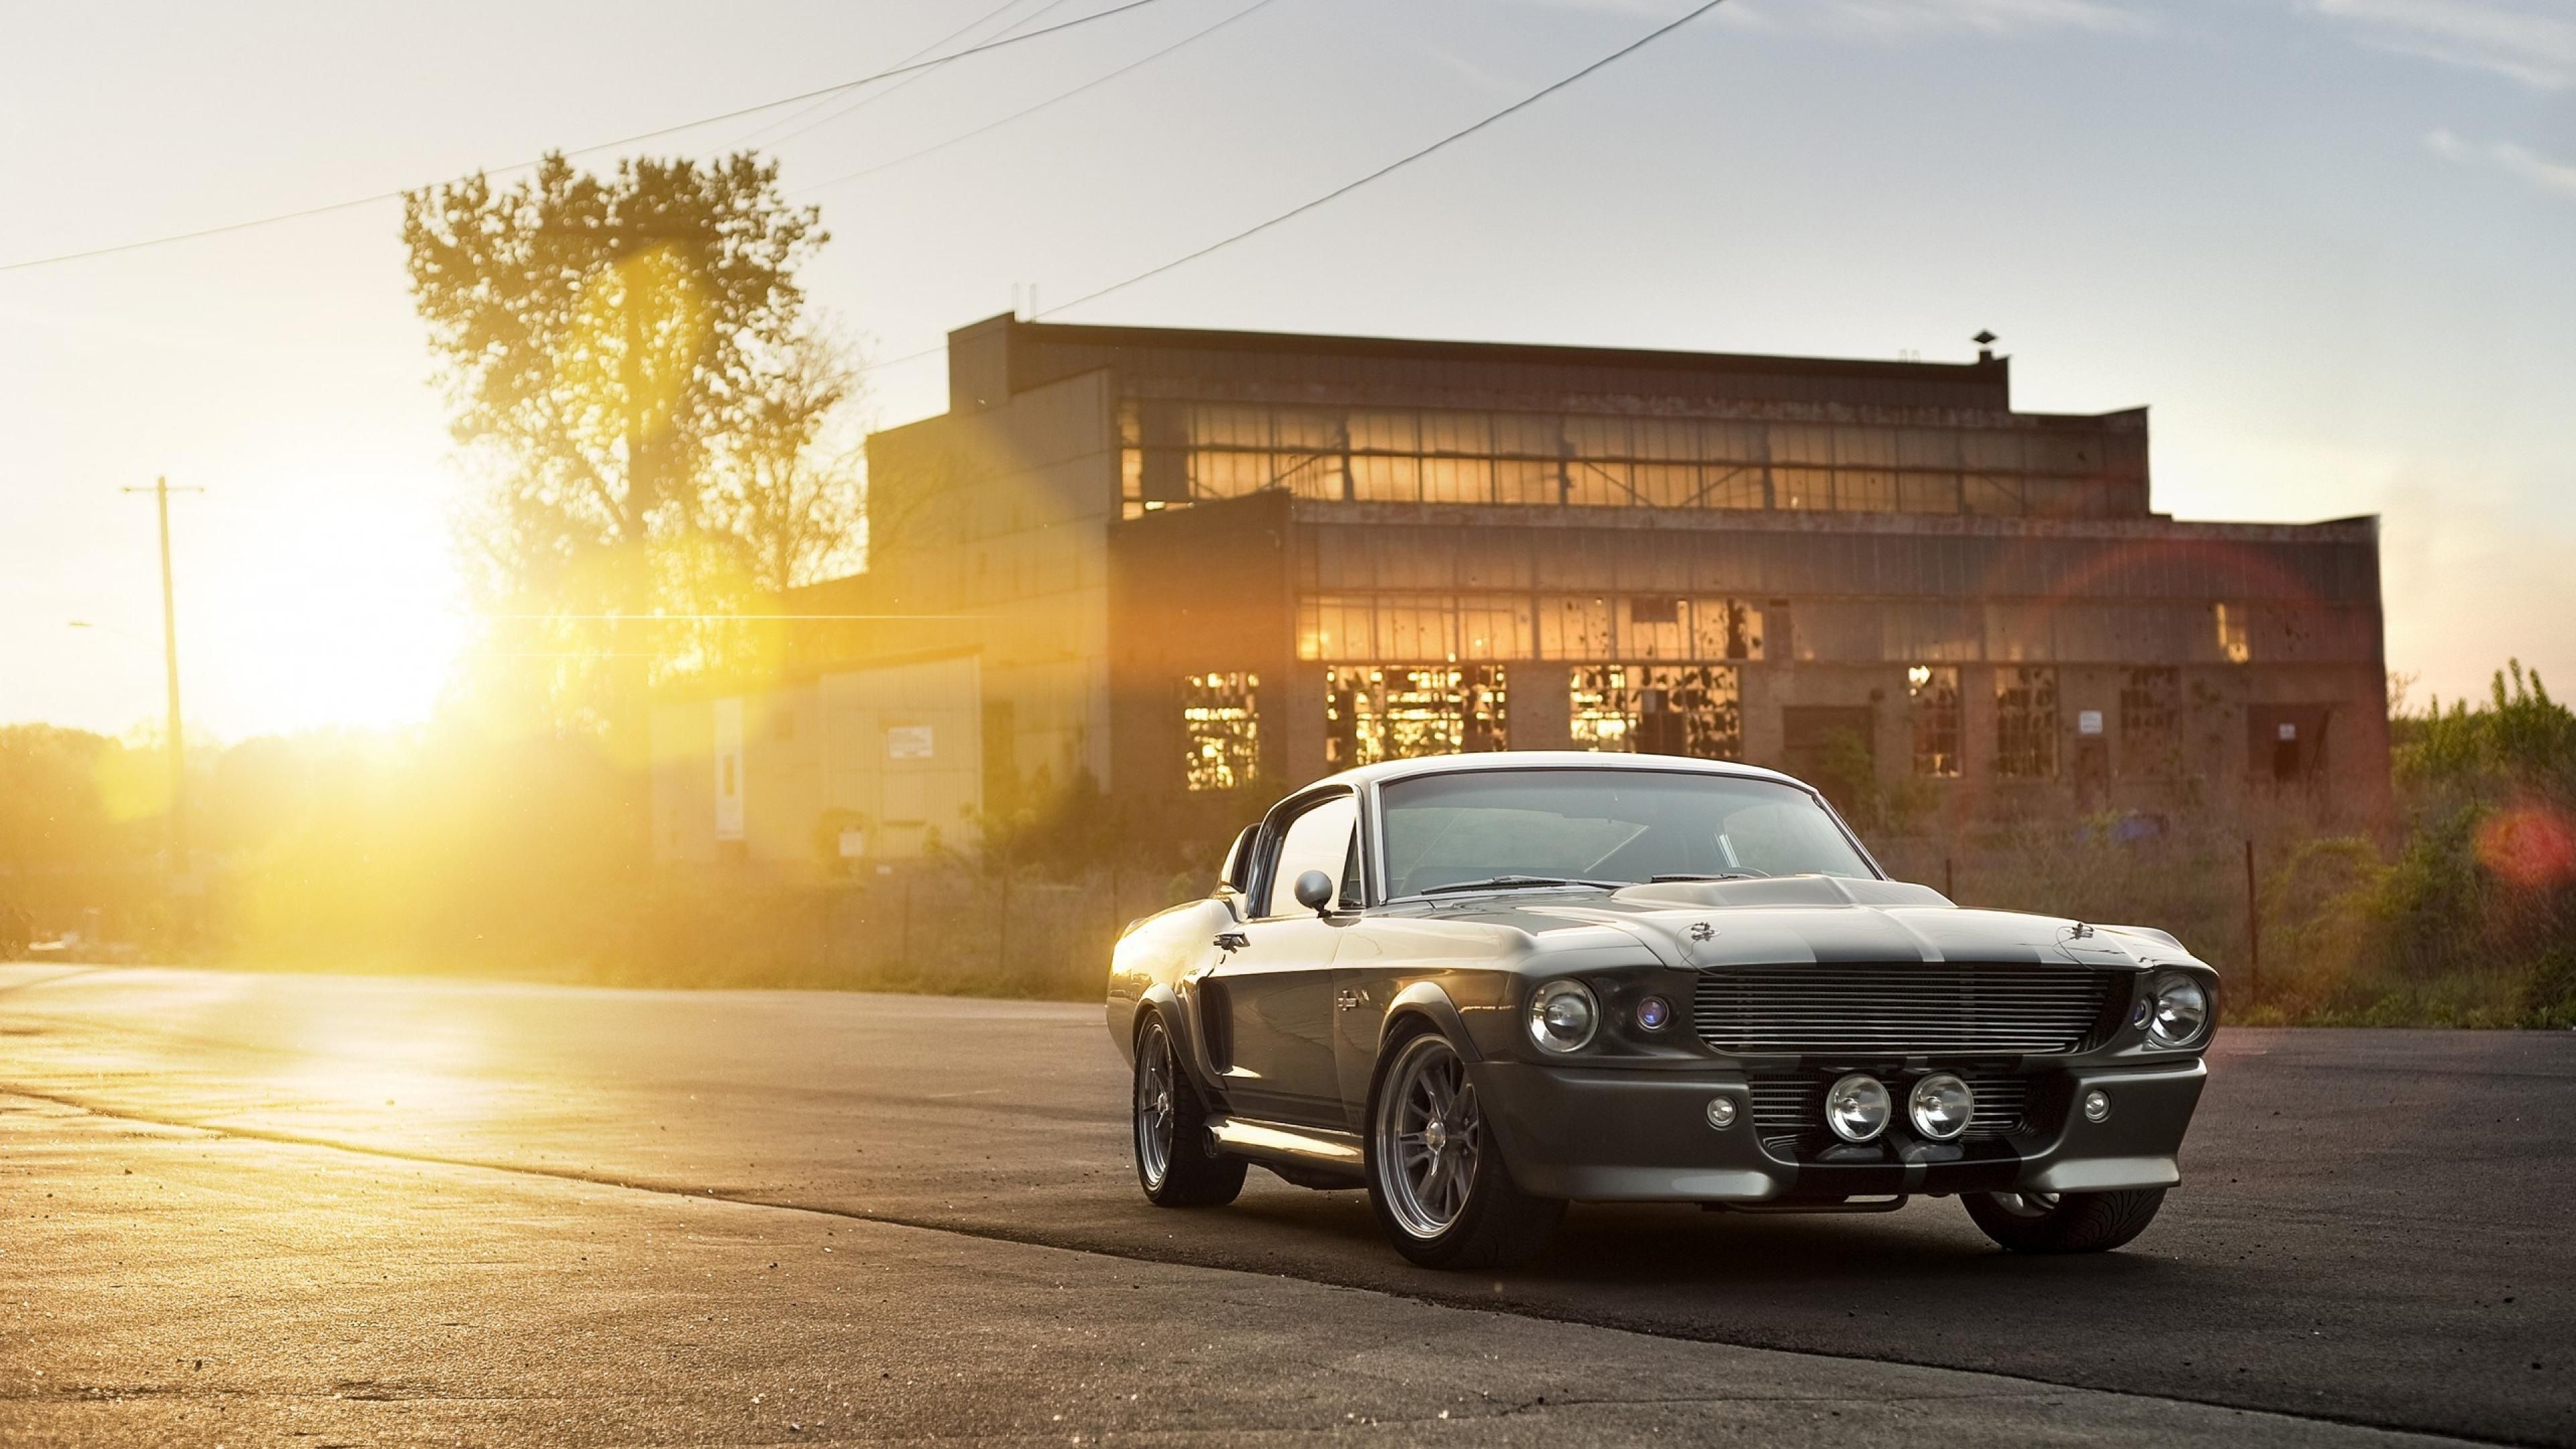 Mustang Eleanor, Collector's choice, Iconic design, 1967 GT classic, Muscle power, 3840x2160 4K Desktop